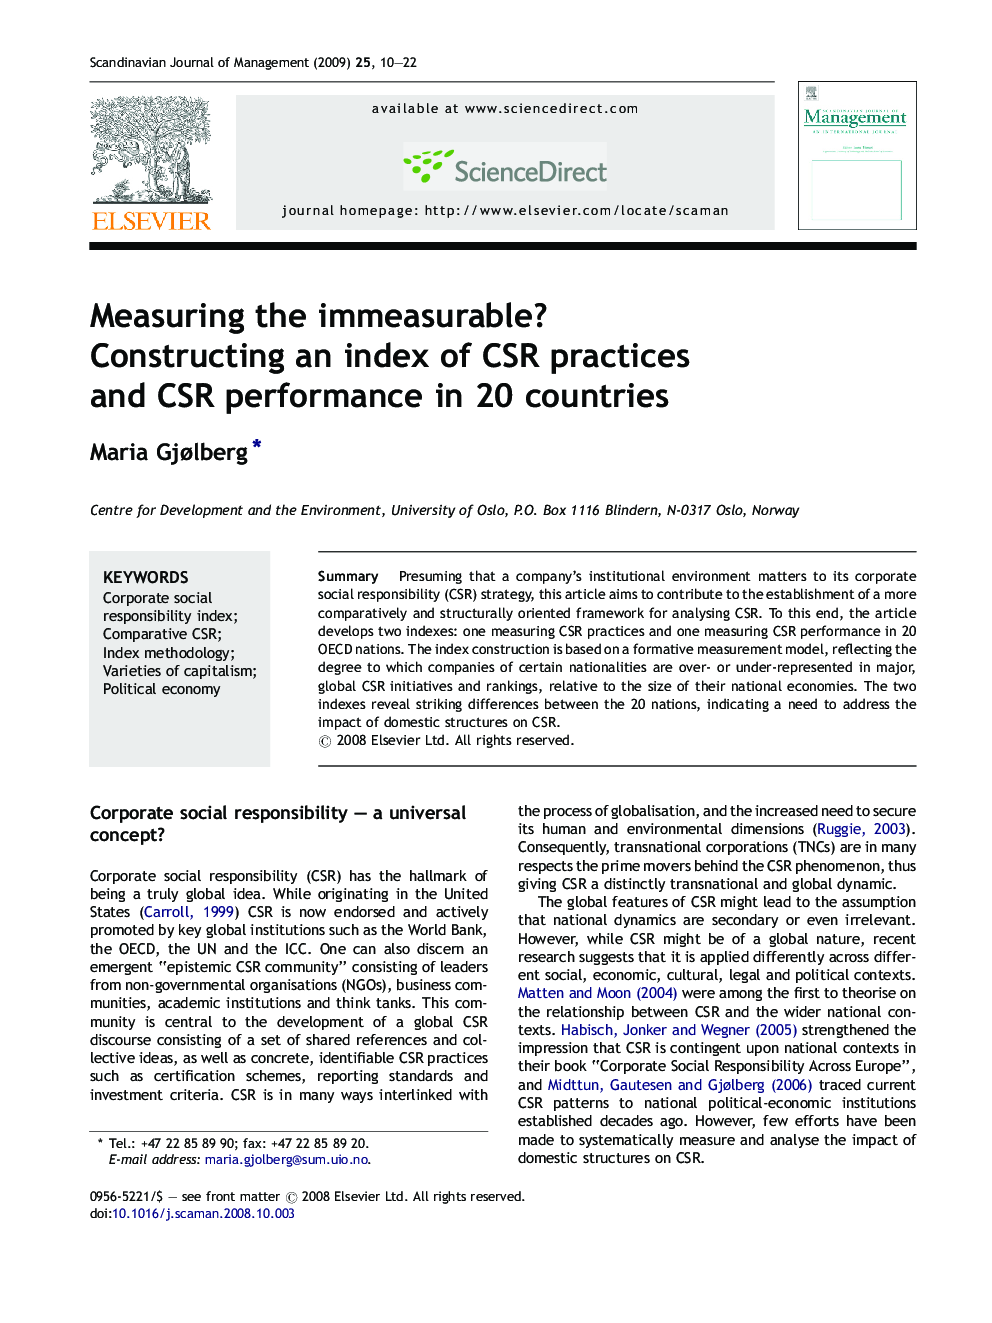 Measuring the immeasurable?: Constructing an index of CSR practices and CSR performance in 20 countries